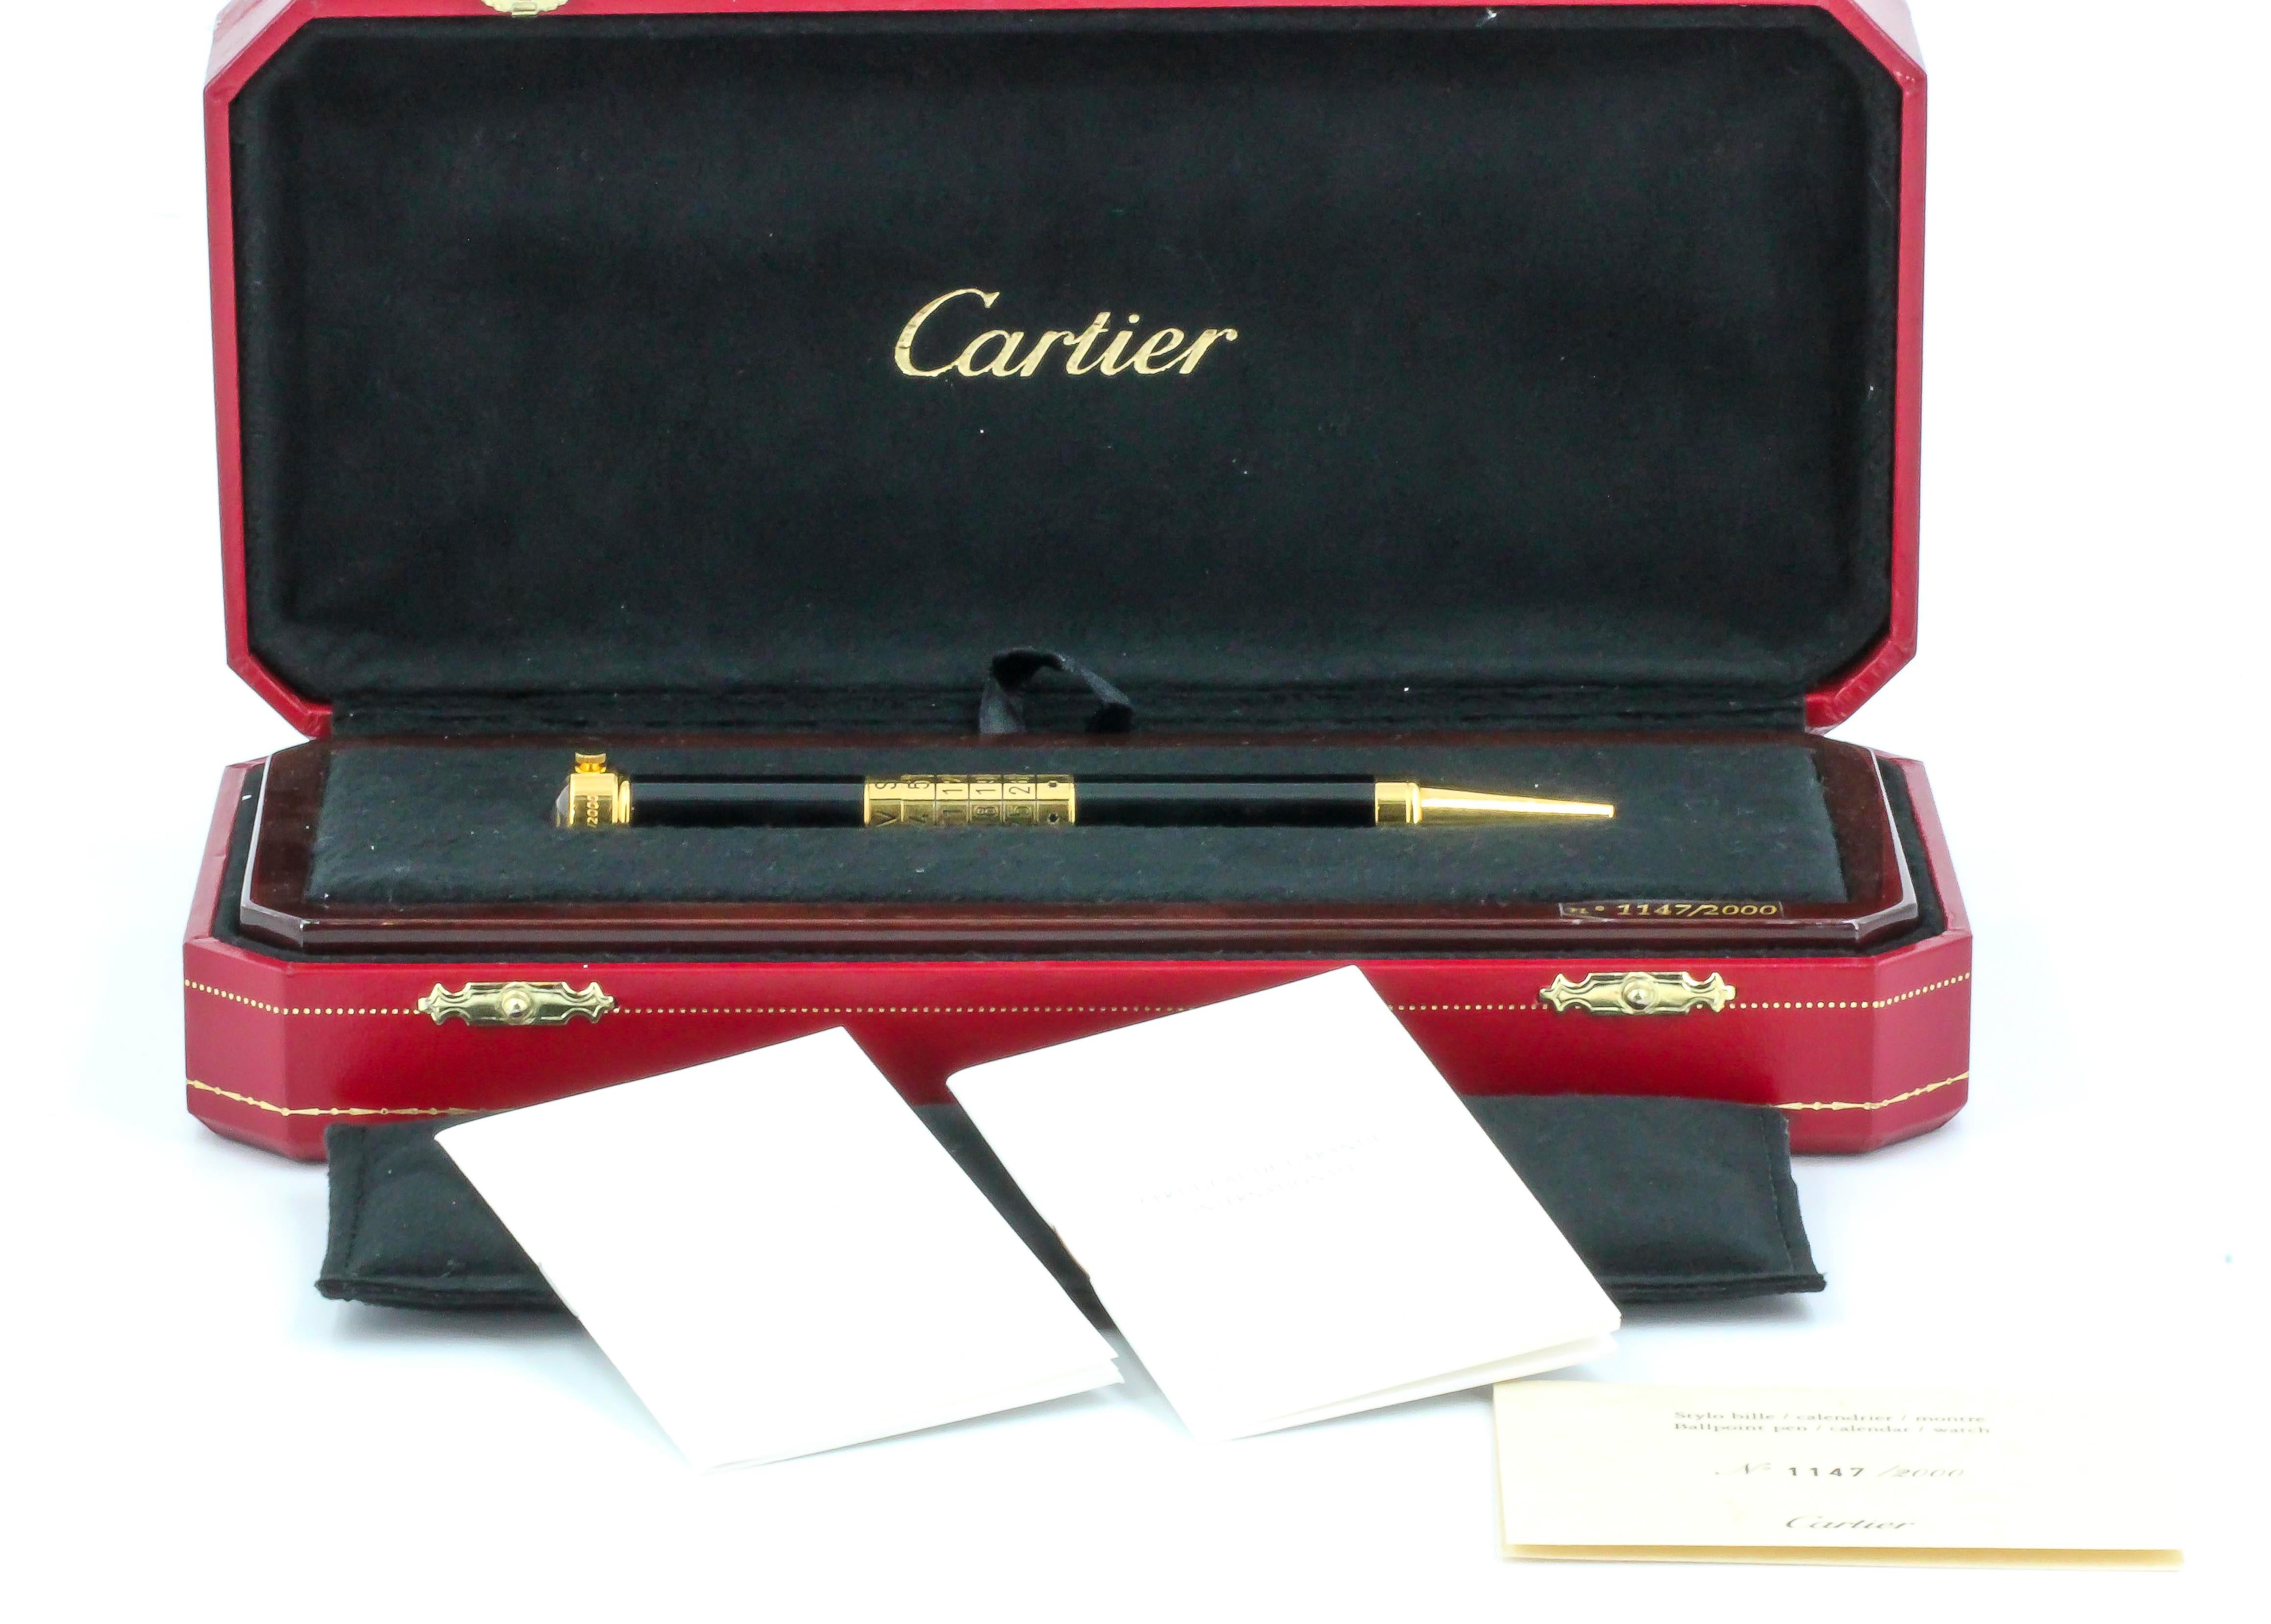 Cartier Perpetual Calendar Limited Edition Watch Pen For Sale 2